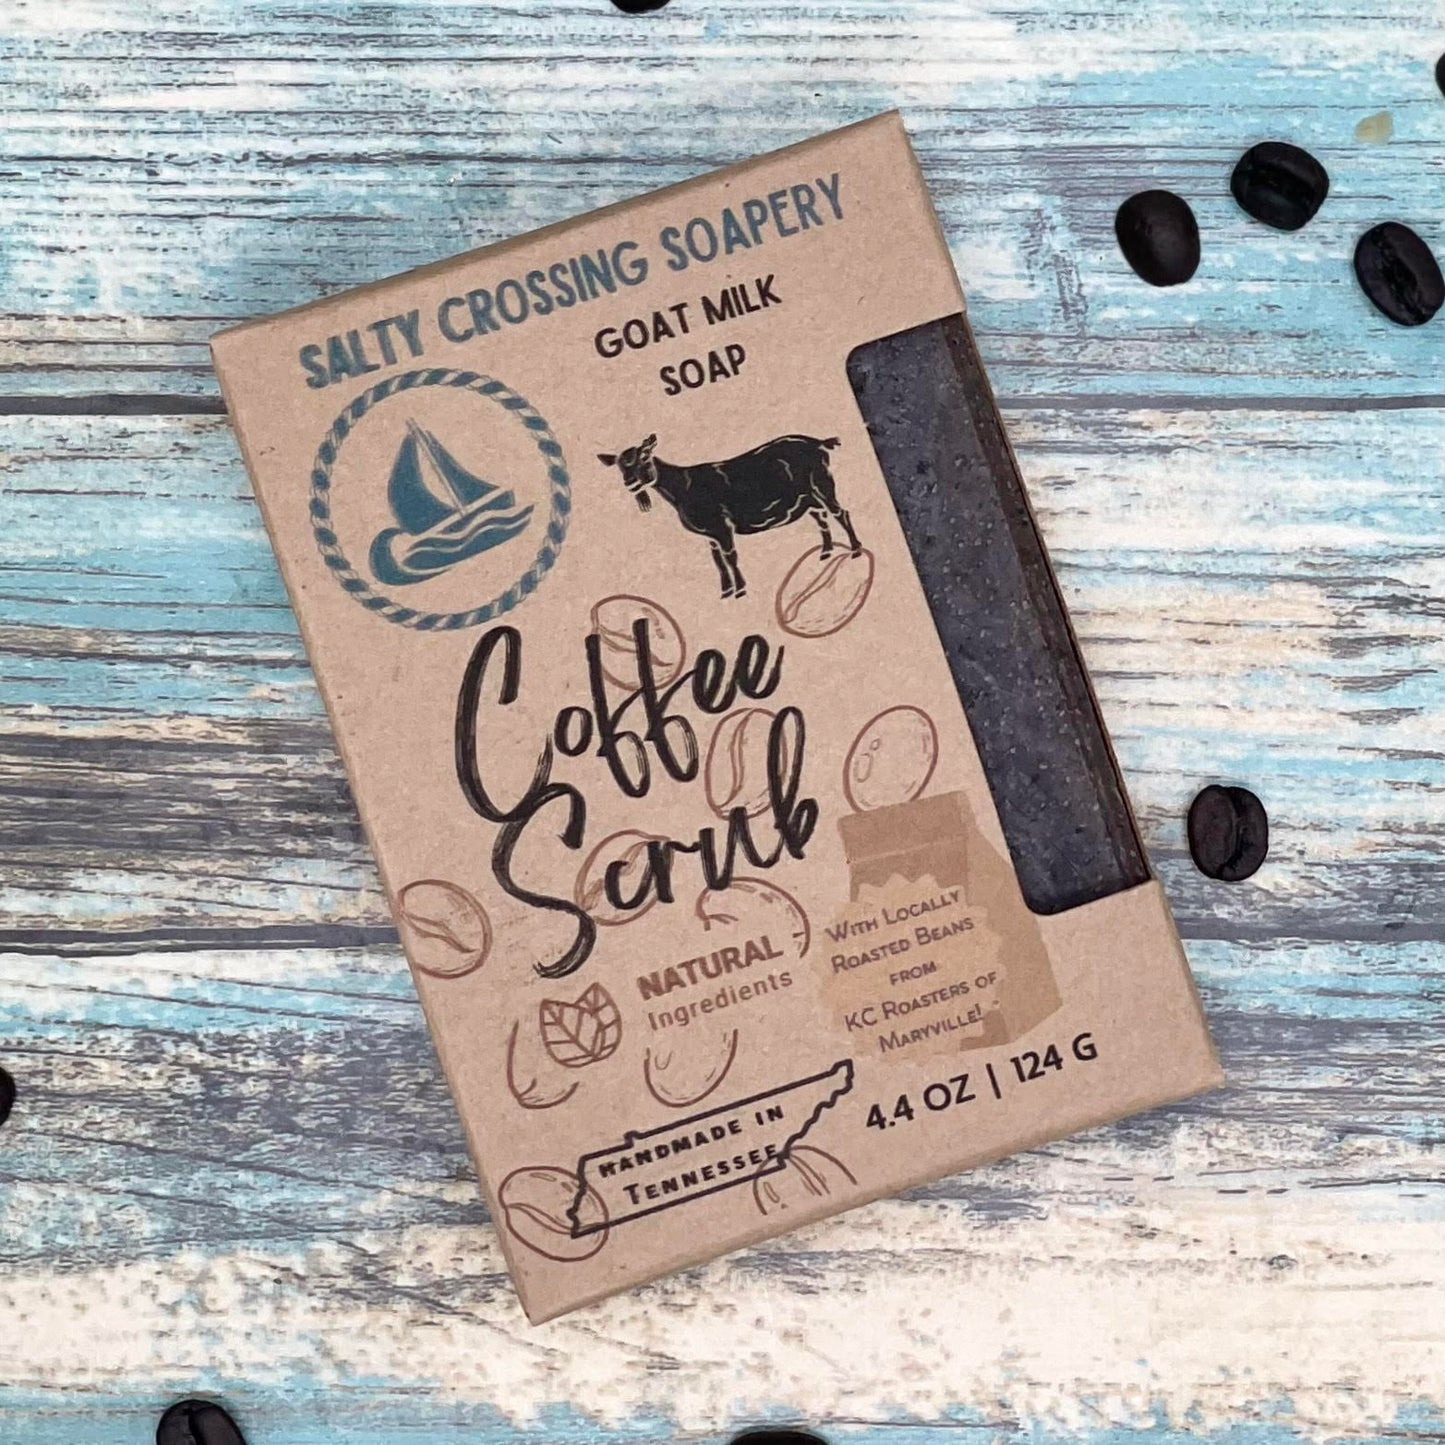 Coffee Scrub Soap | Handmade Goat Milk Artisan Bar | All Natural Ingredients | Gift for Javaphile | Ecofriendly Recycled Zero Waste Package